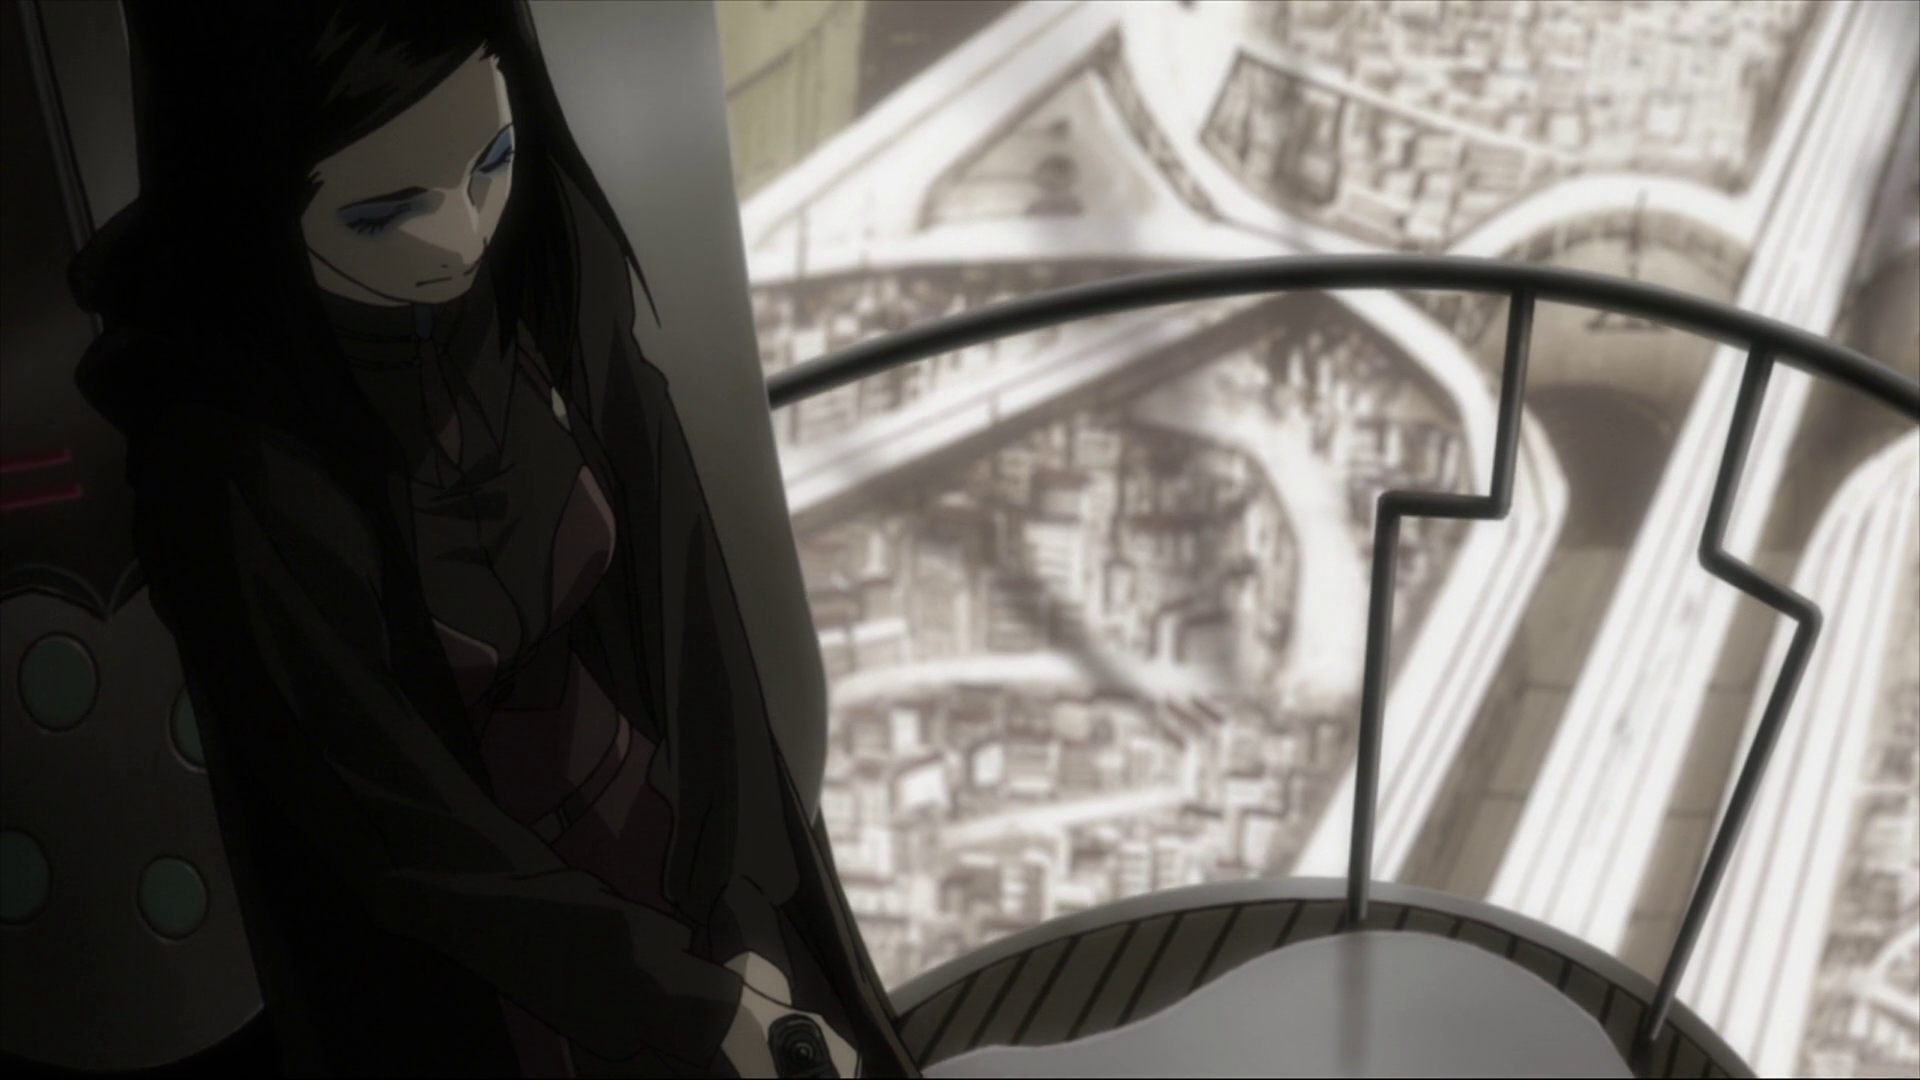 Ergo Proxy vs Serial Experiments Lain: Which is a better